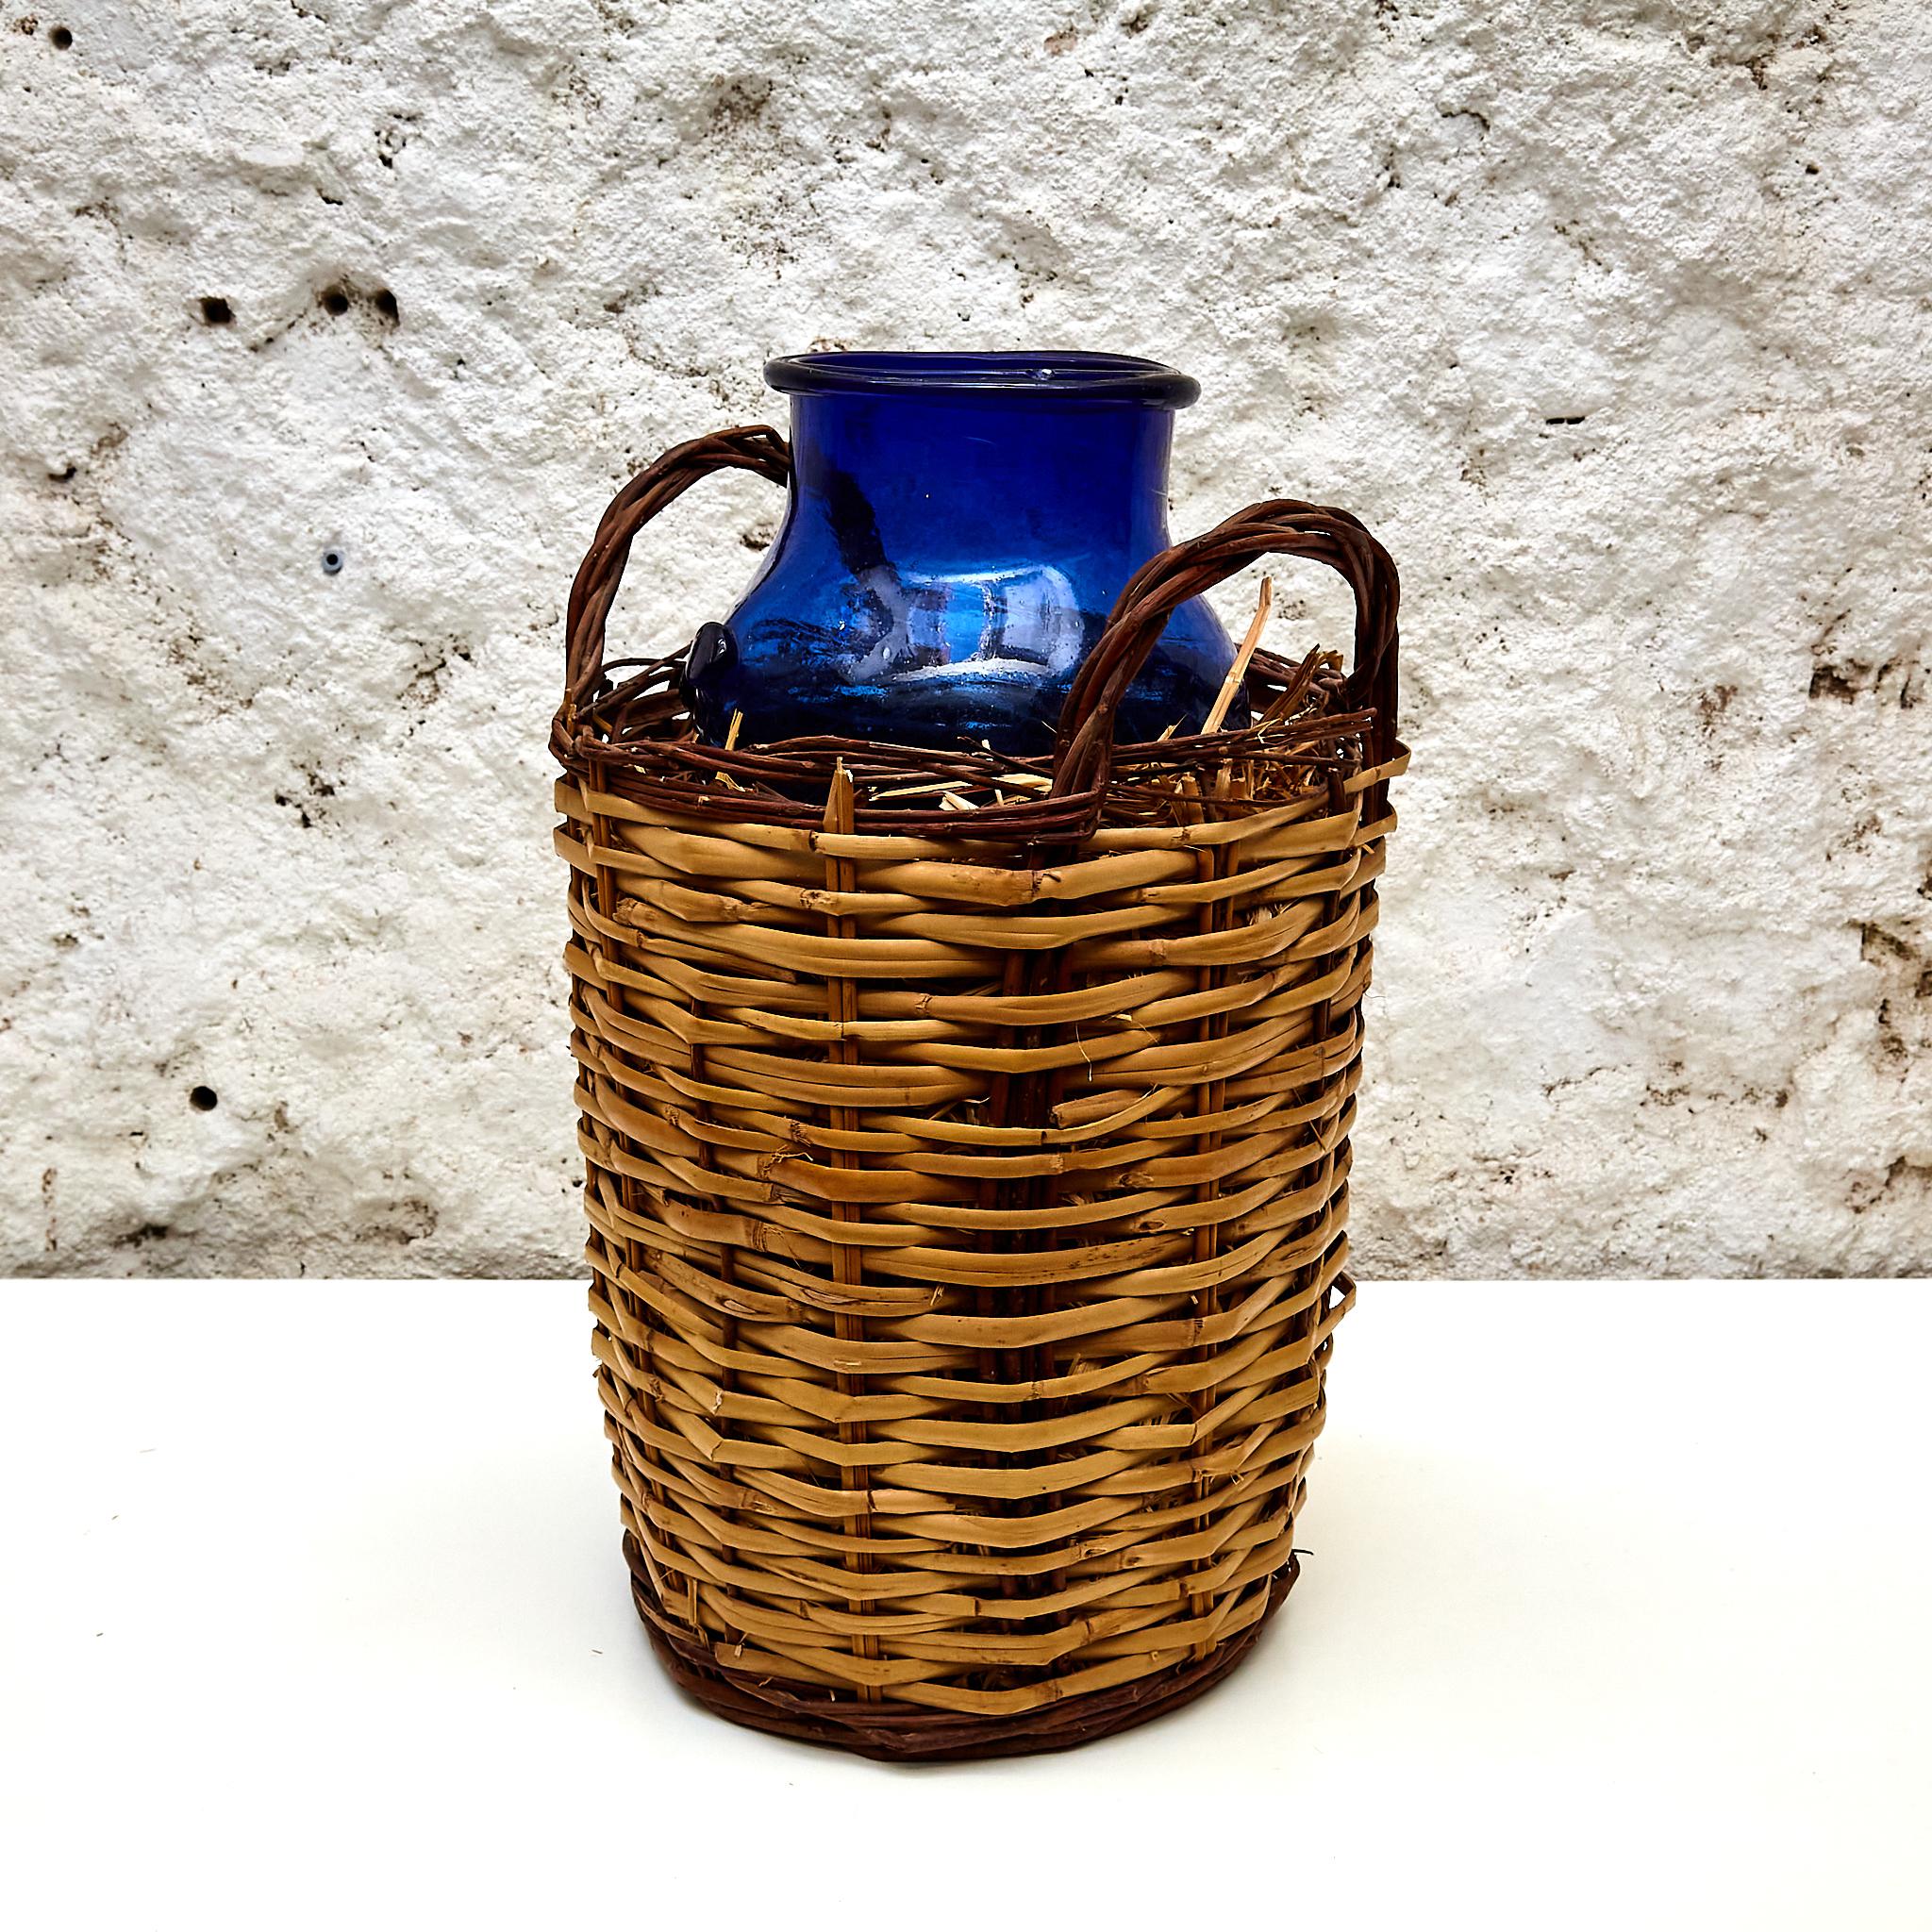 Rustic Blue Glass Bottle with Wicker Basket, circa 1930